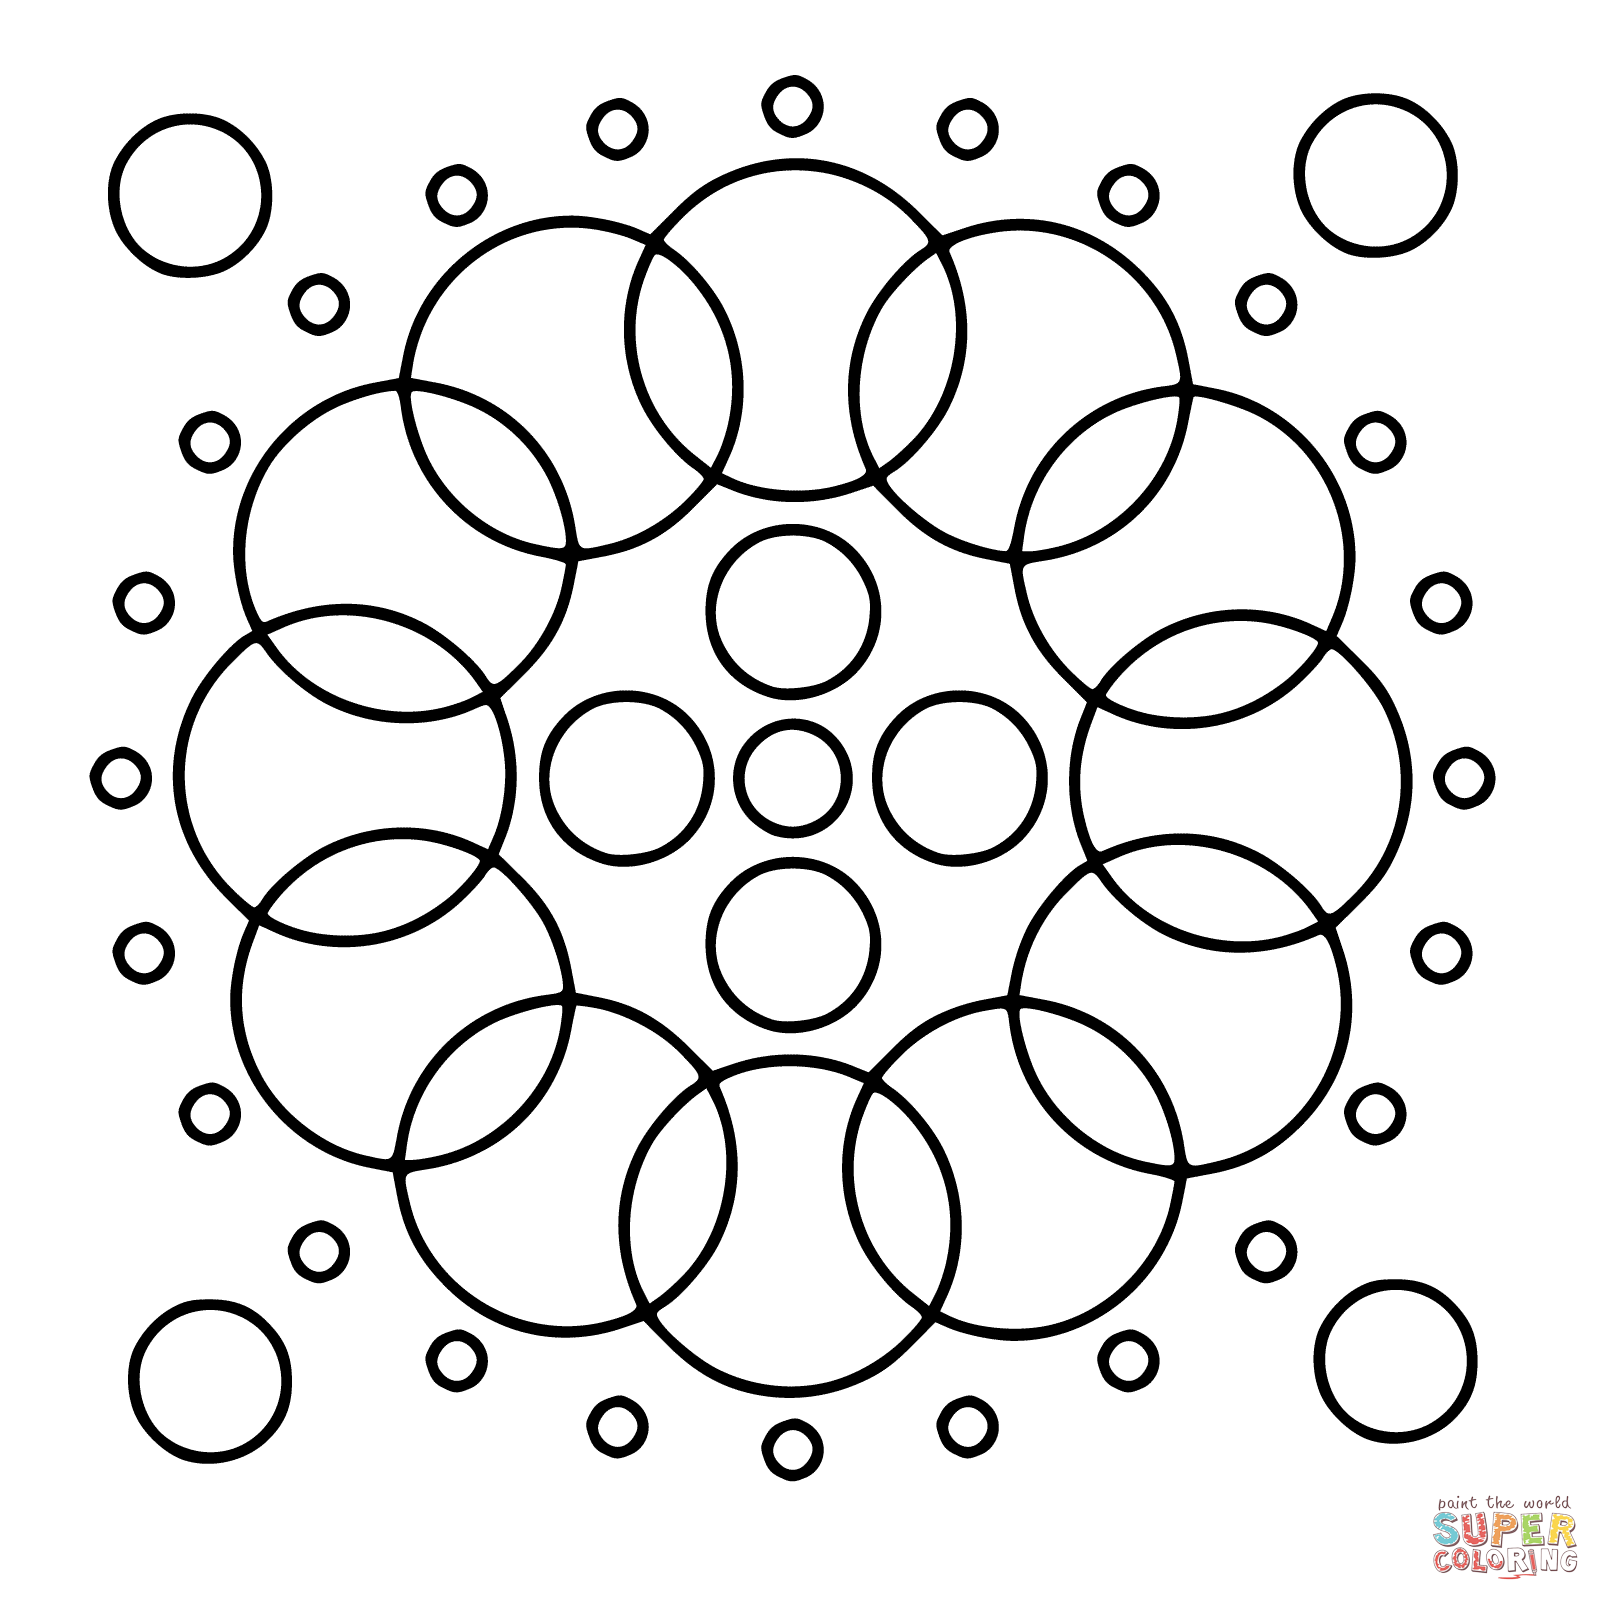 Circles Coloring Page Coloring Home